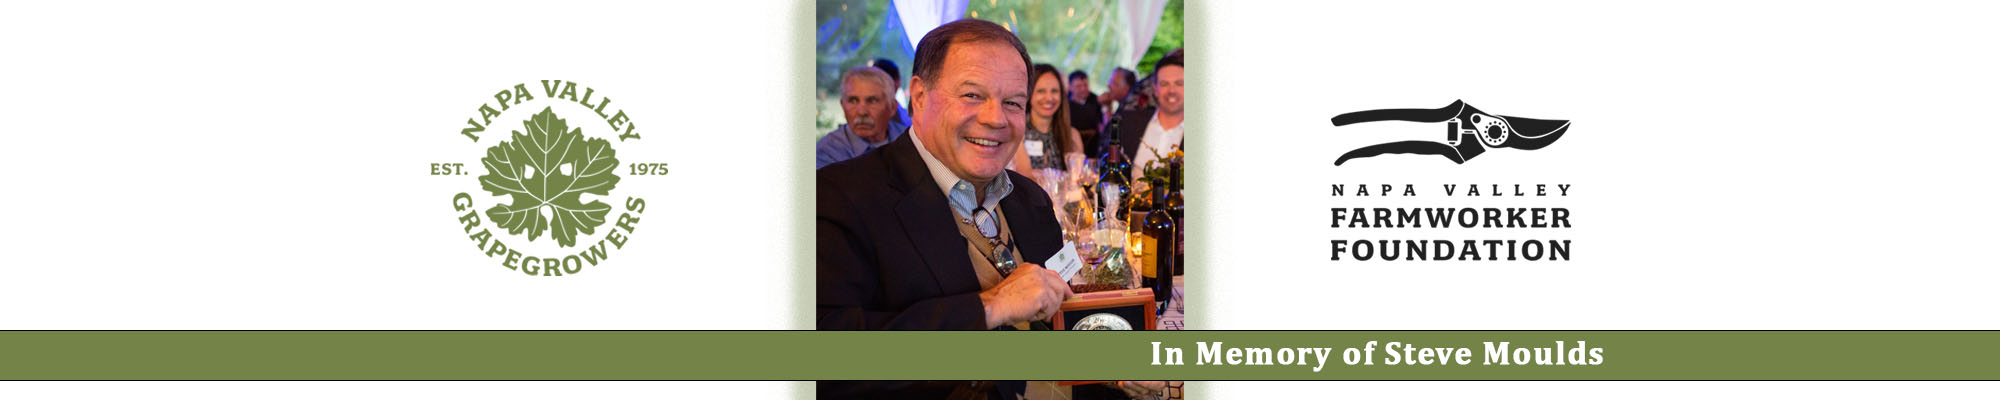 Steve Moulds, 2018 Napa Valley Grower of the Year